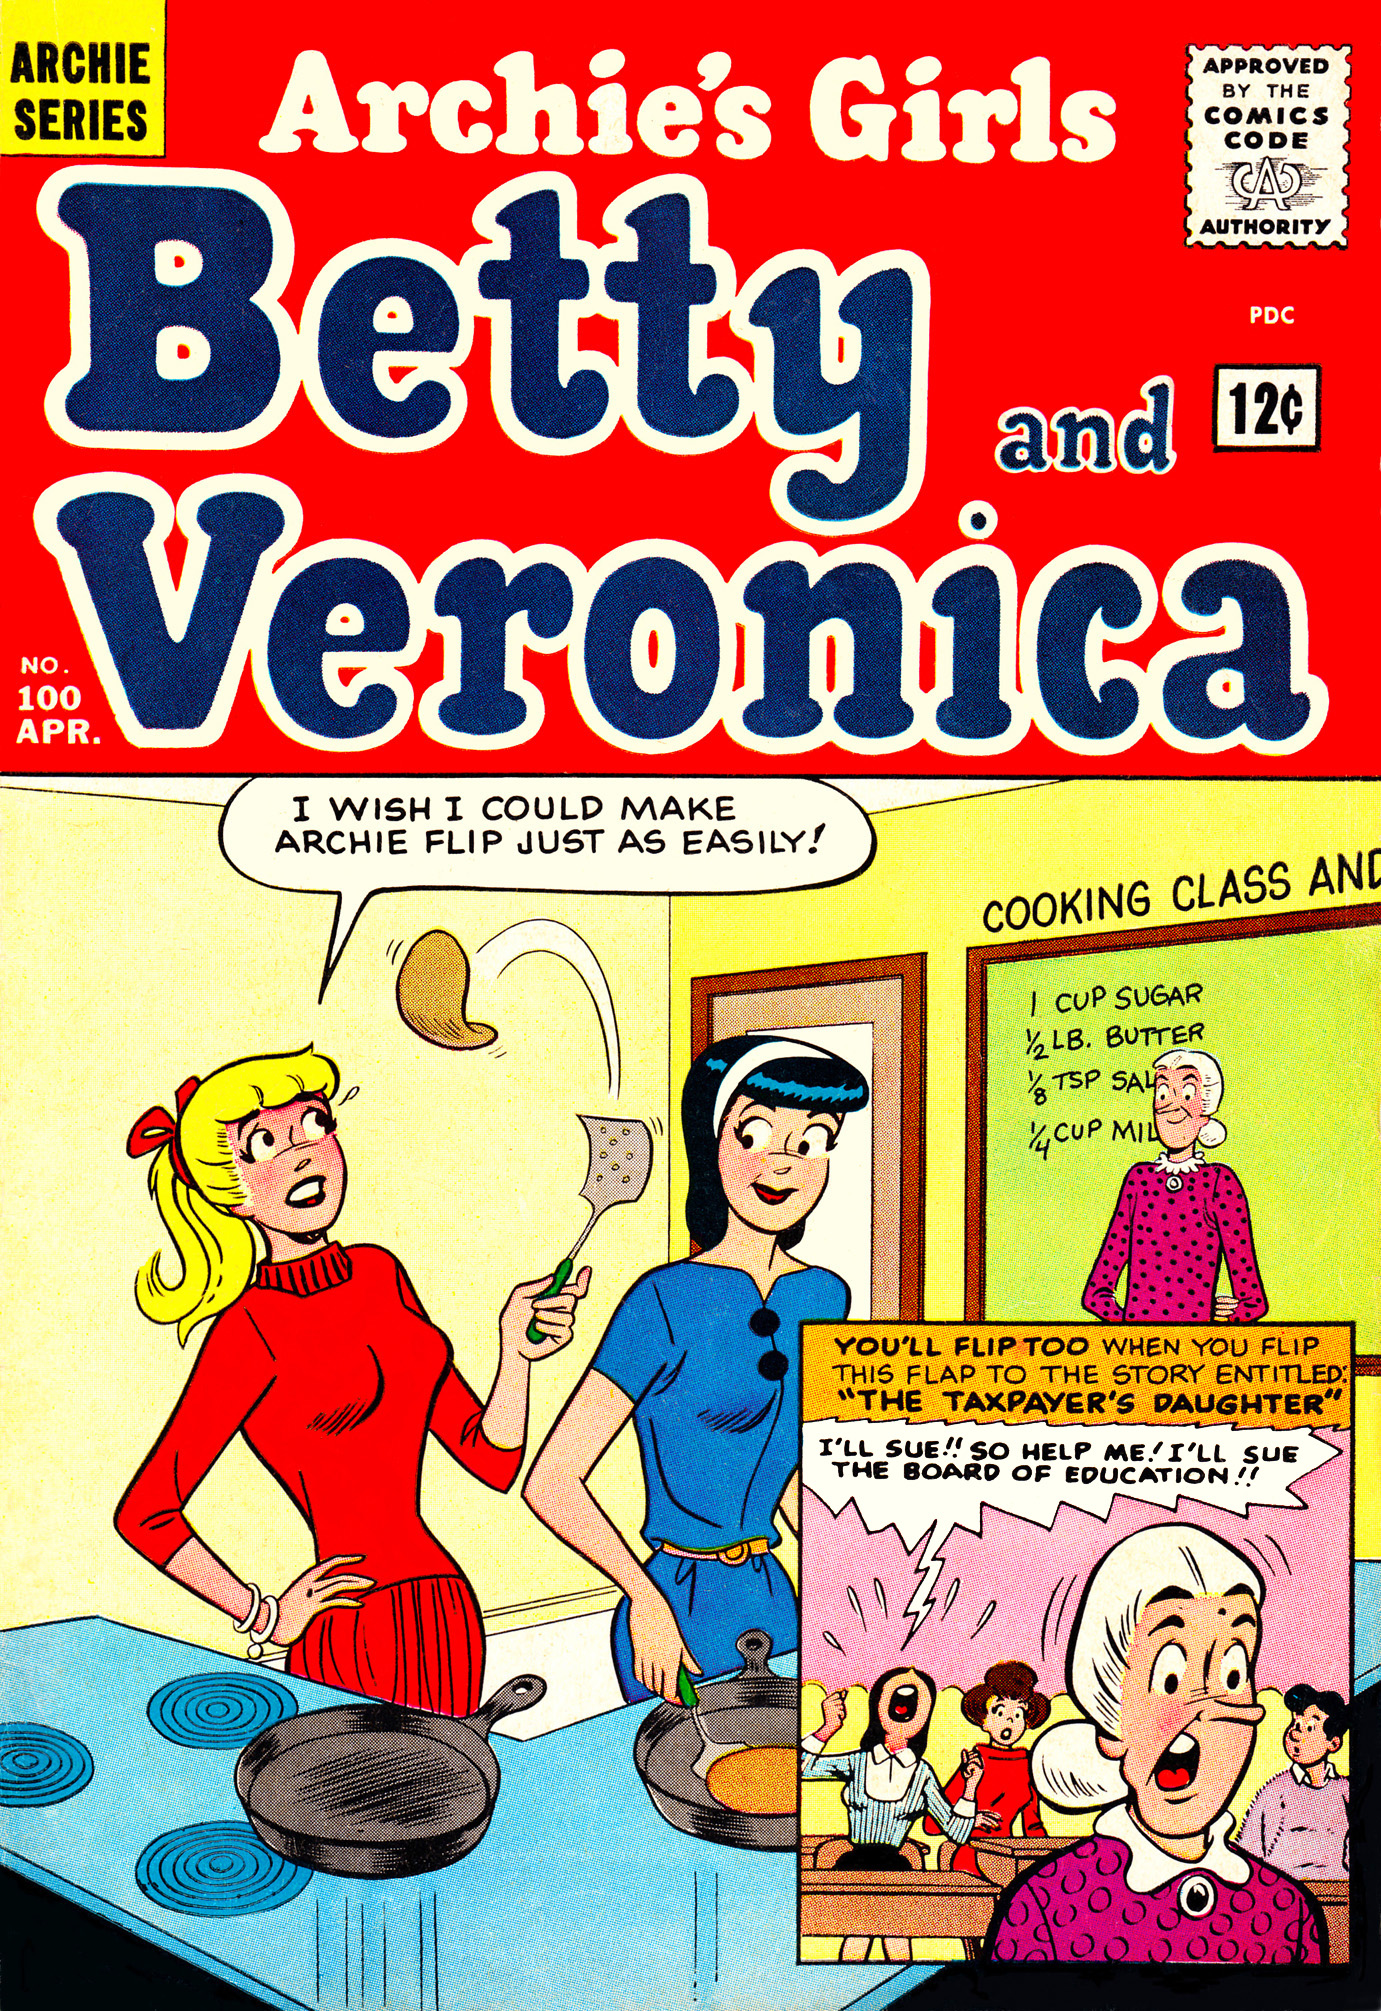 Archie S Girls Betty And Veronica Issue 100 | Read Archie S Girls Betty And  Veronica Issue 100 comic online in high quality. Read Full Comic online for  free - Read comics